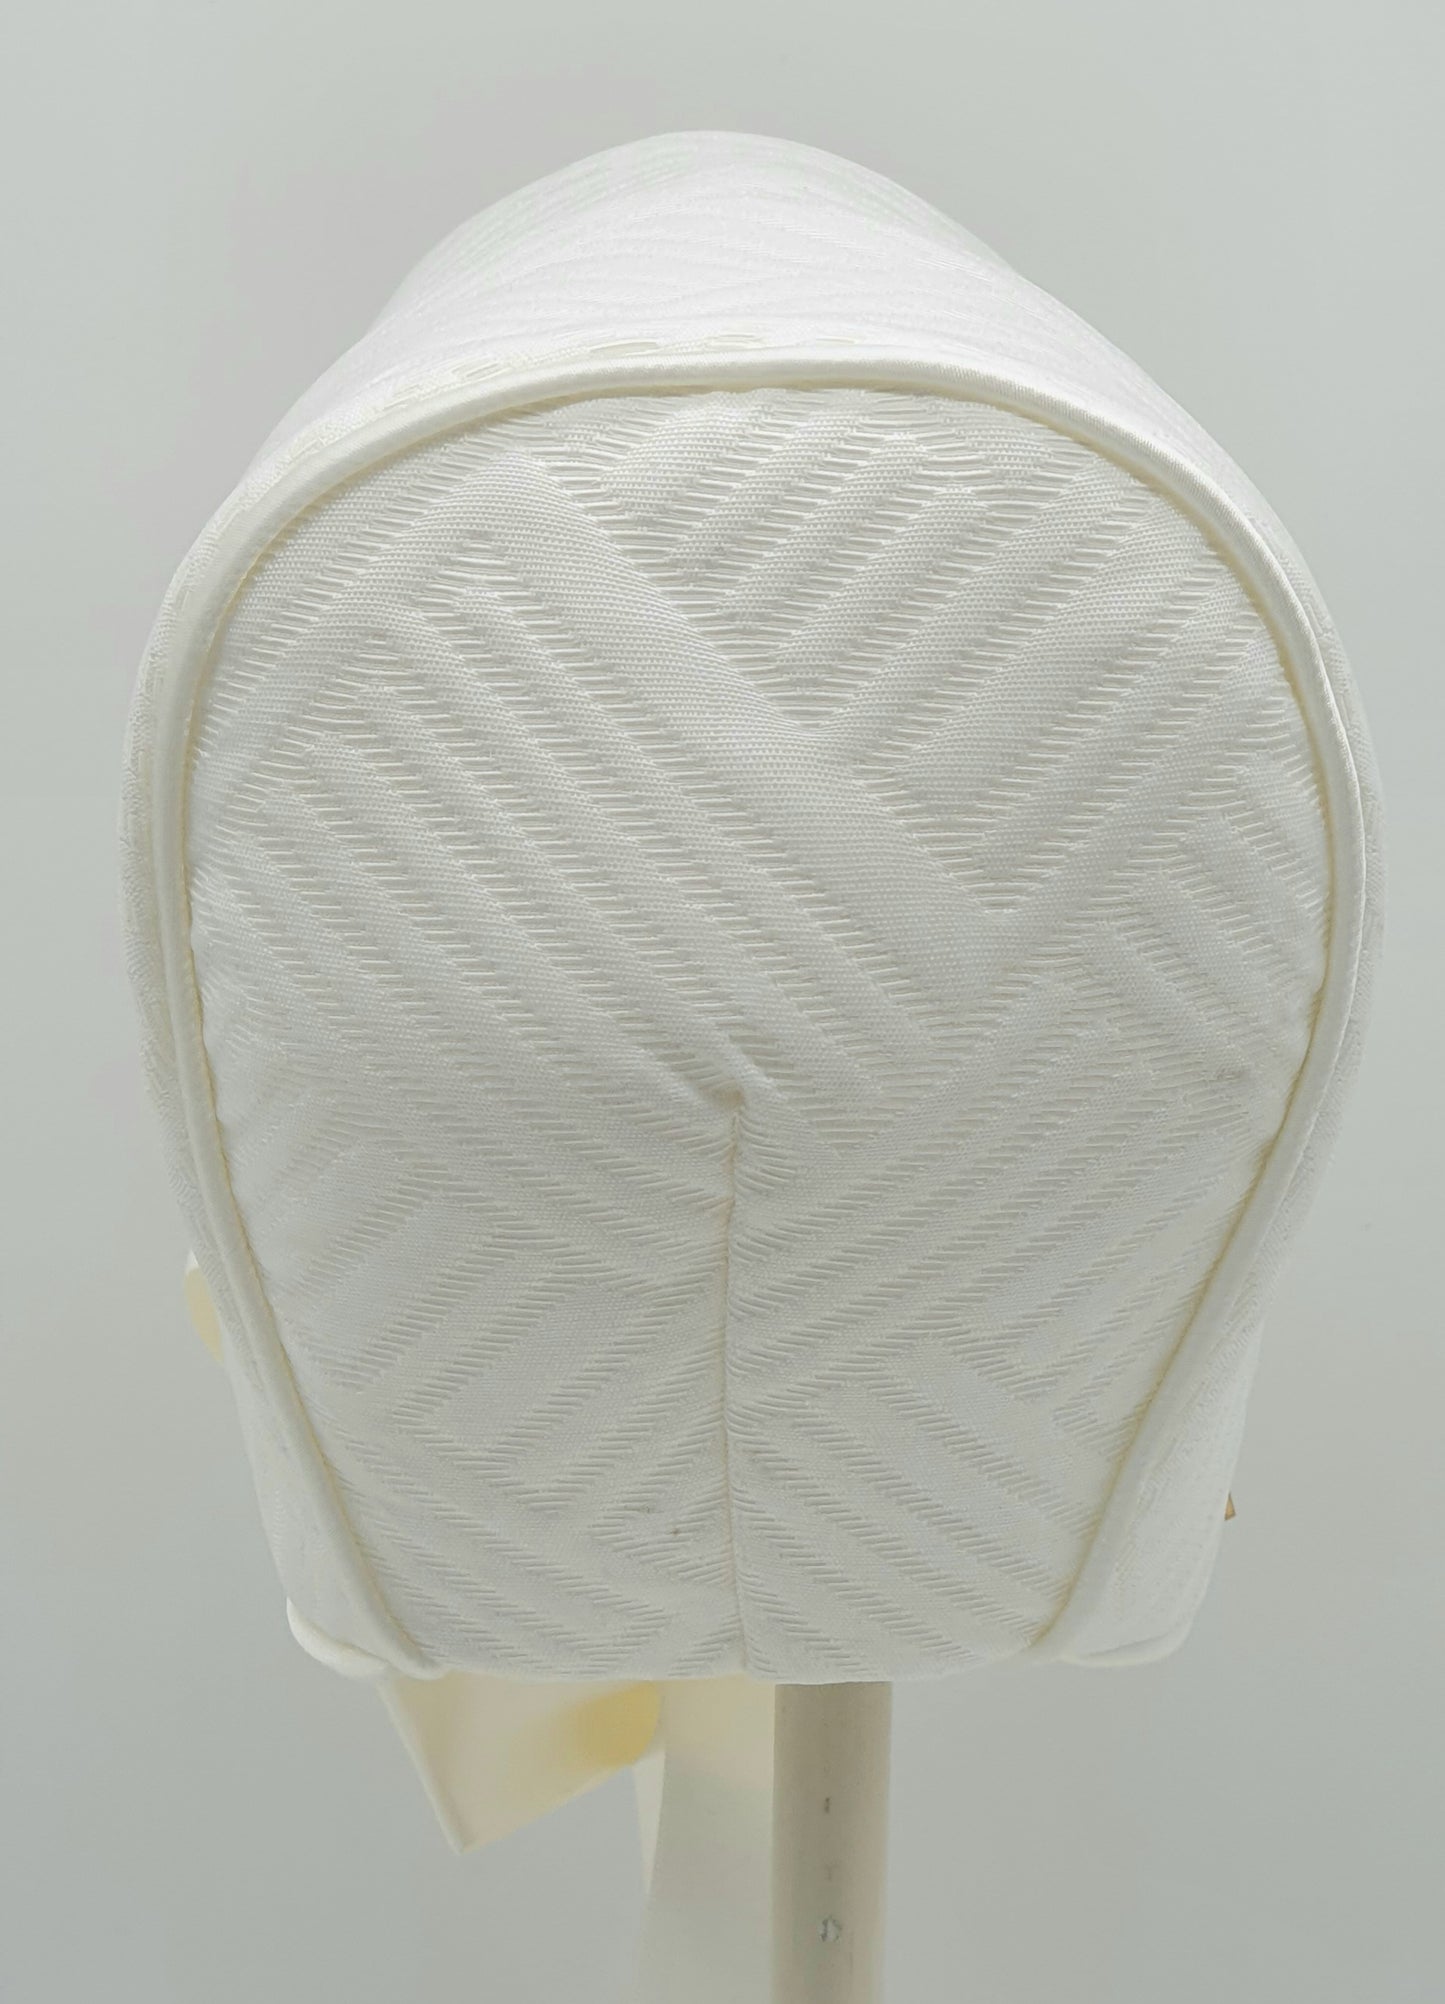 Exclusive Bonnet, Ivory Jacquard with piping